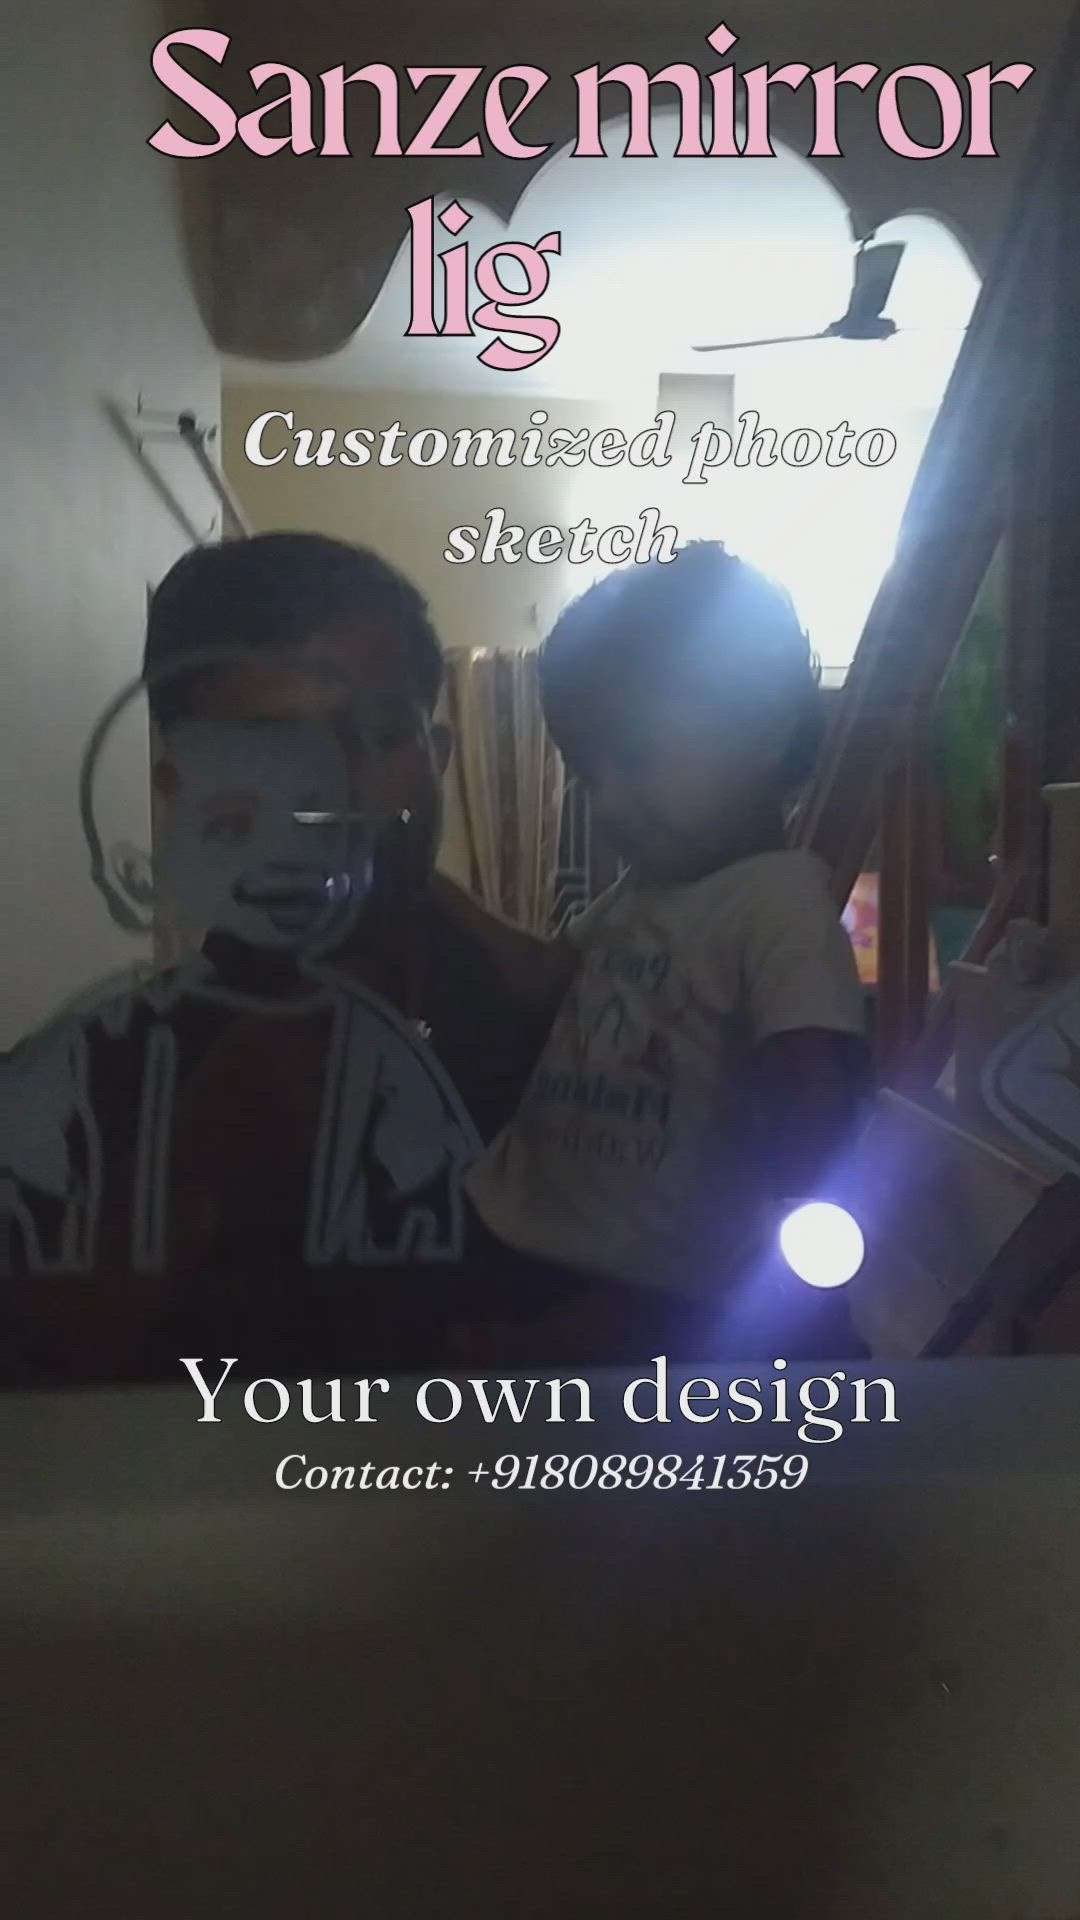 sanze mirror light personalised photo sketch make your own design with sanze mirror lights #homedesignkerala  #LED_Sensor_Mirror